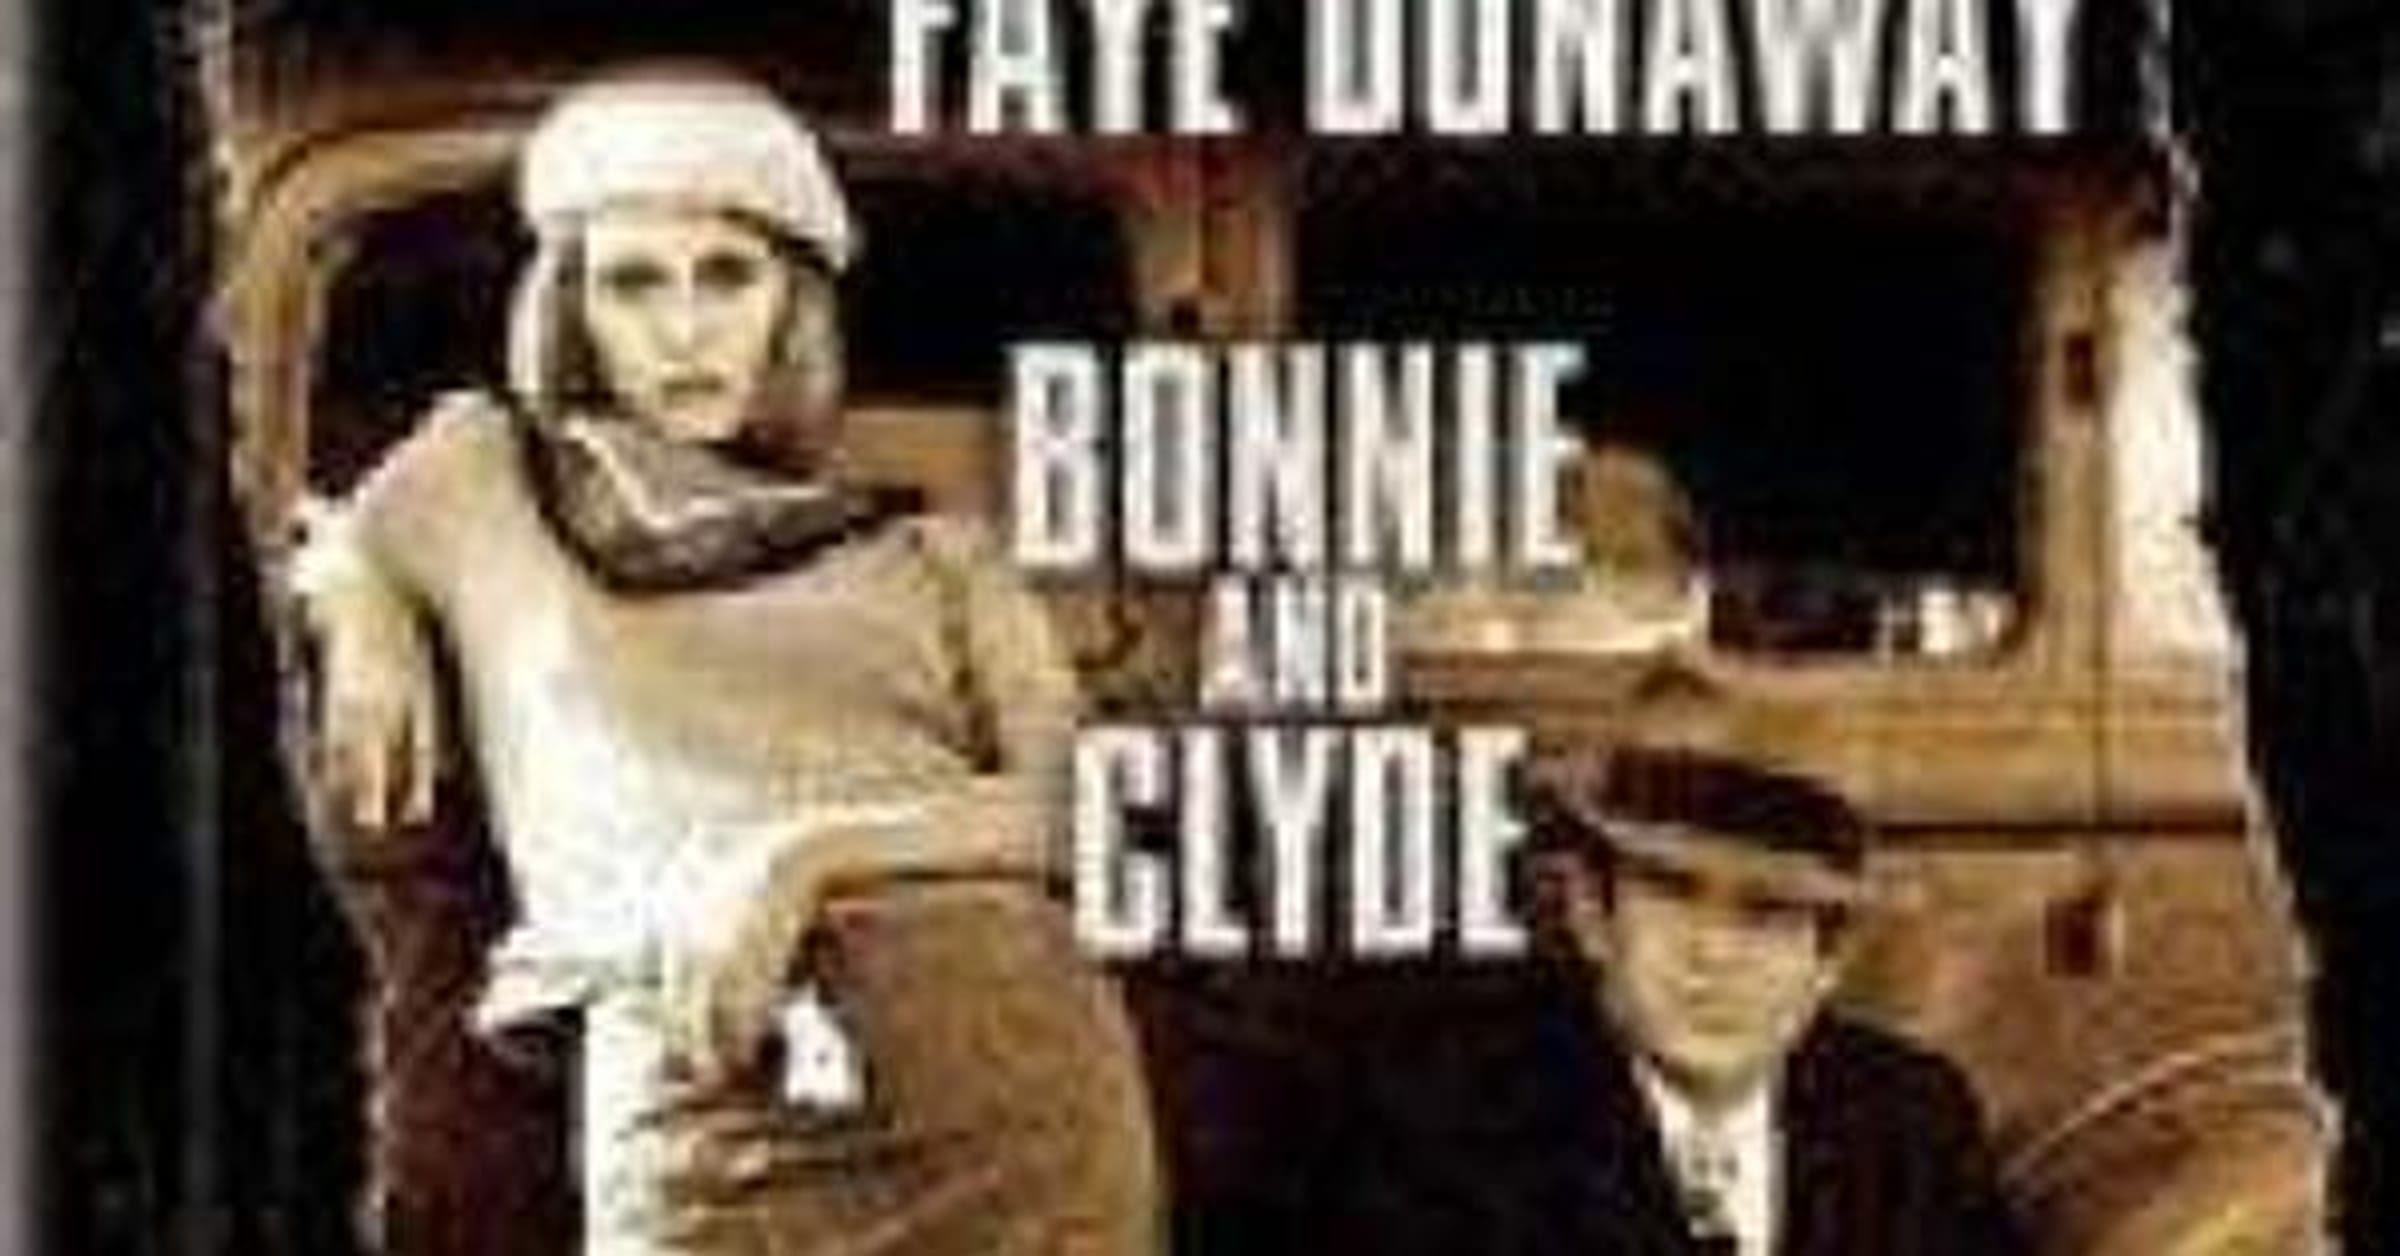 bonnie and clyde movie cast